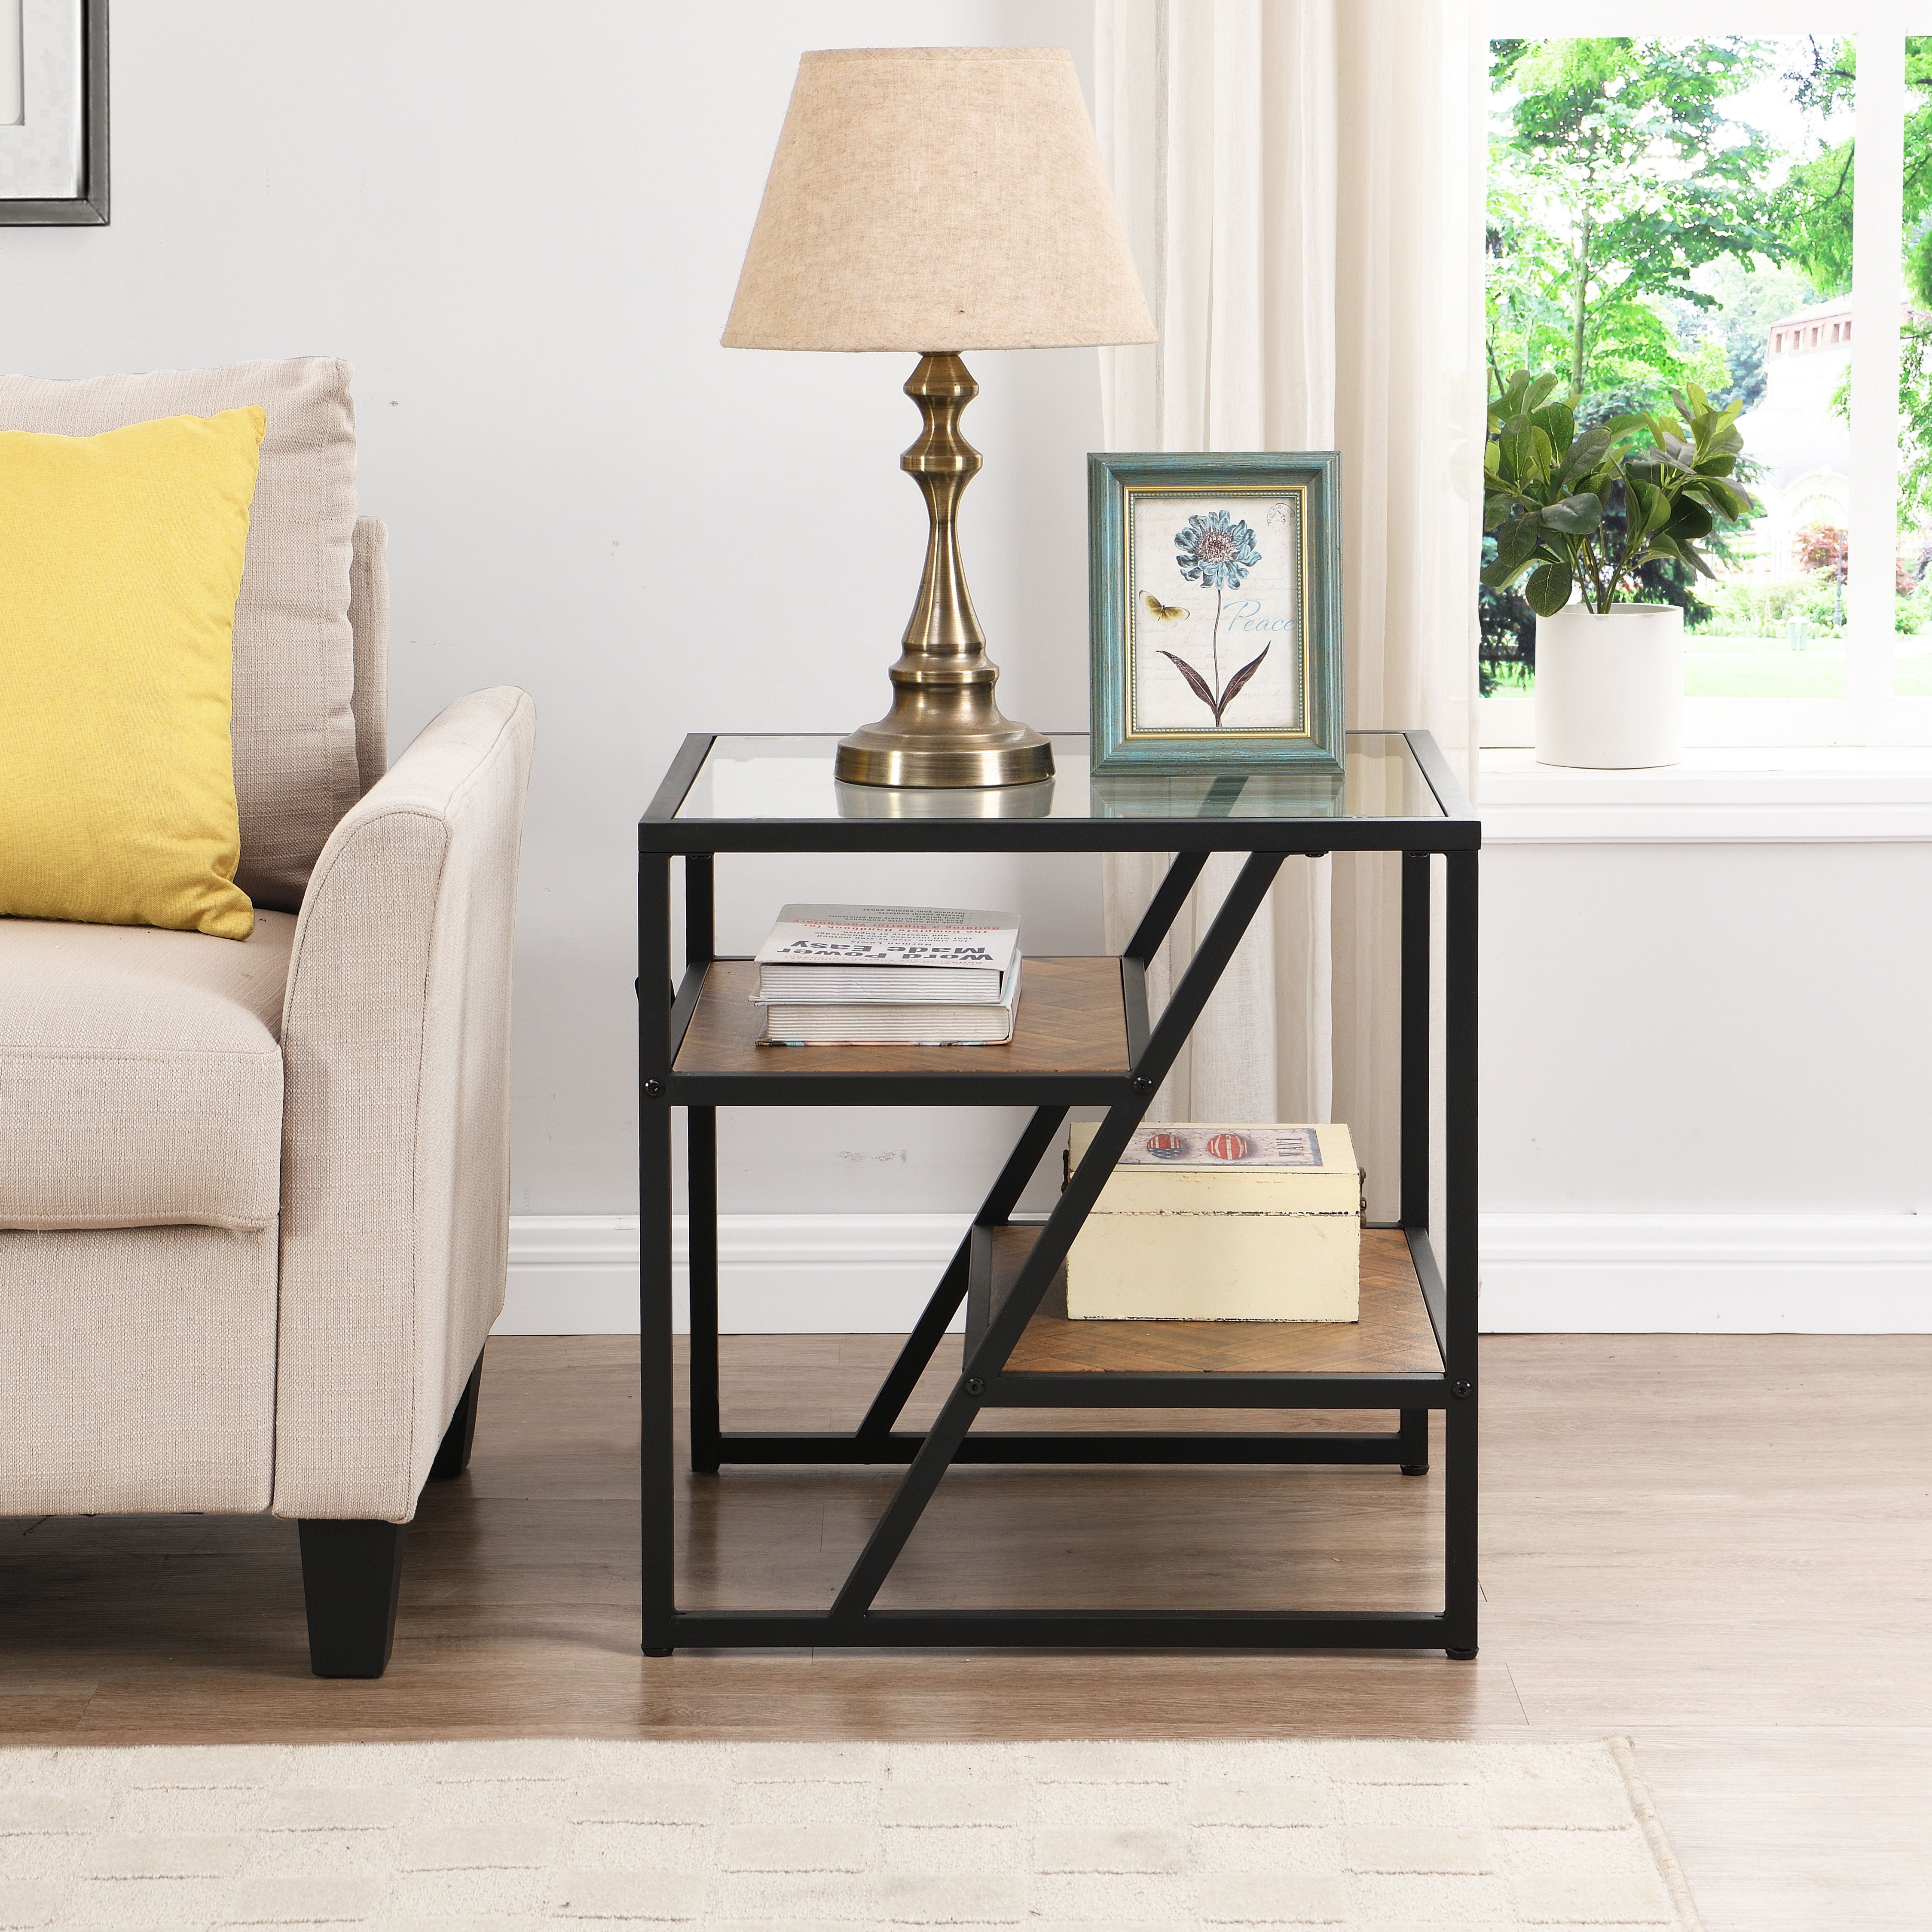 Black Side Table, End Table With Storage Shelf, Tempered Glass Coffee Table With Metal Frame For Living Room & Bed Room